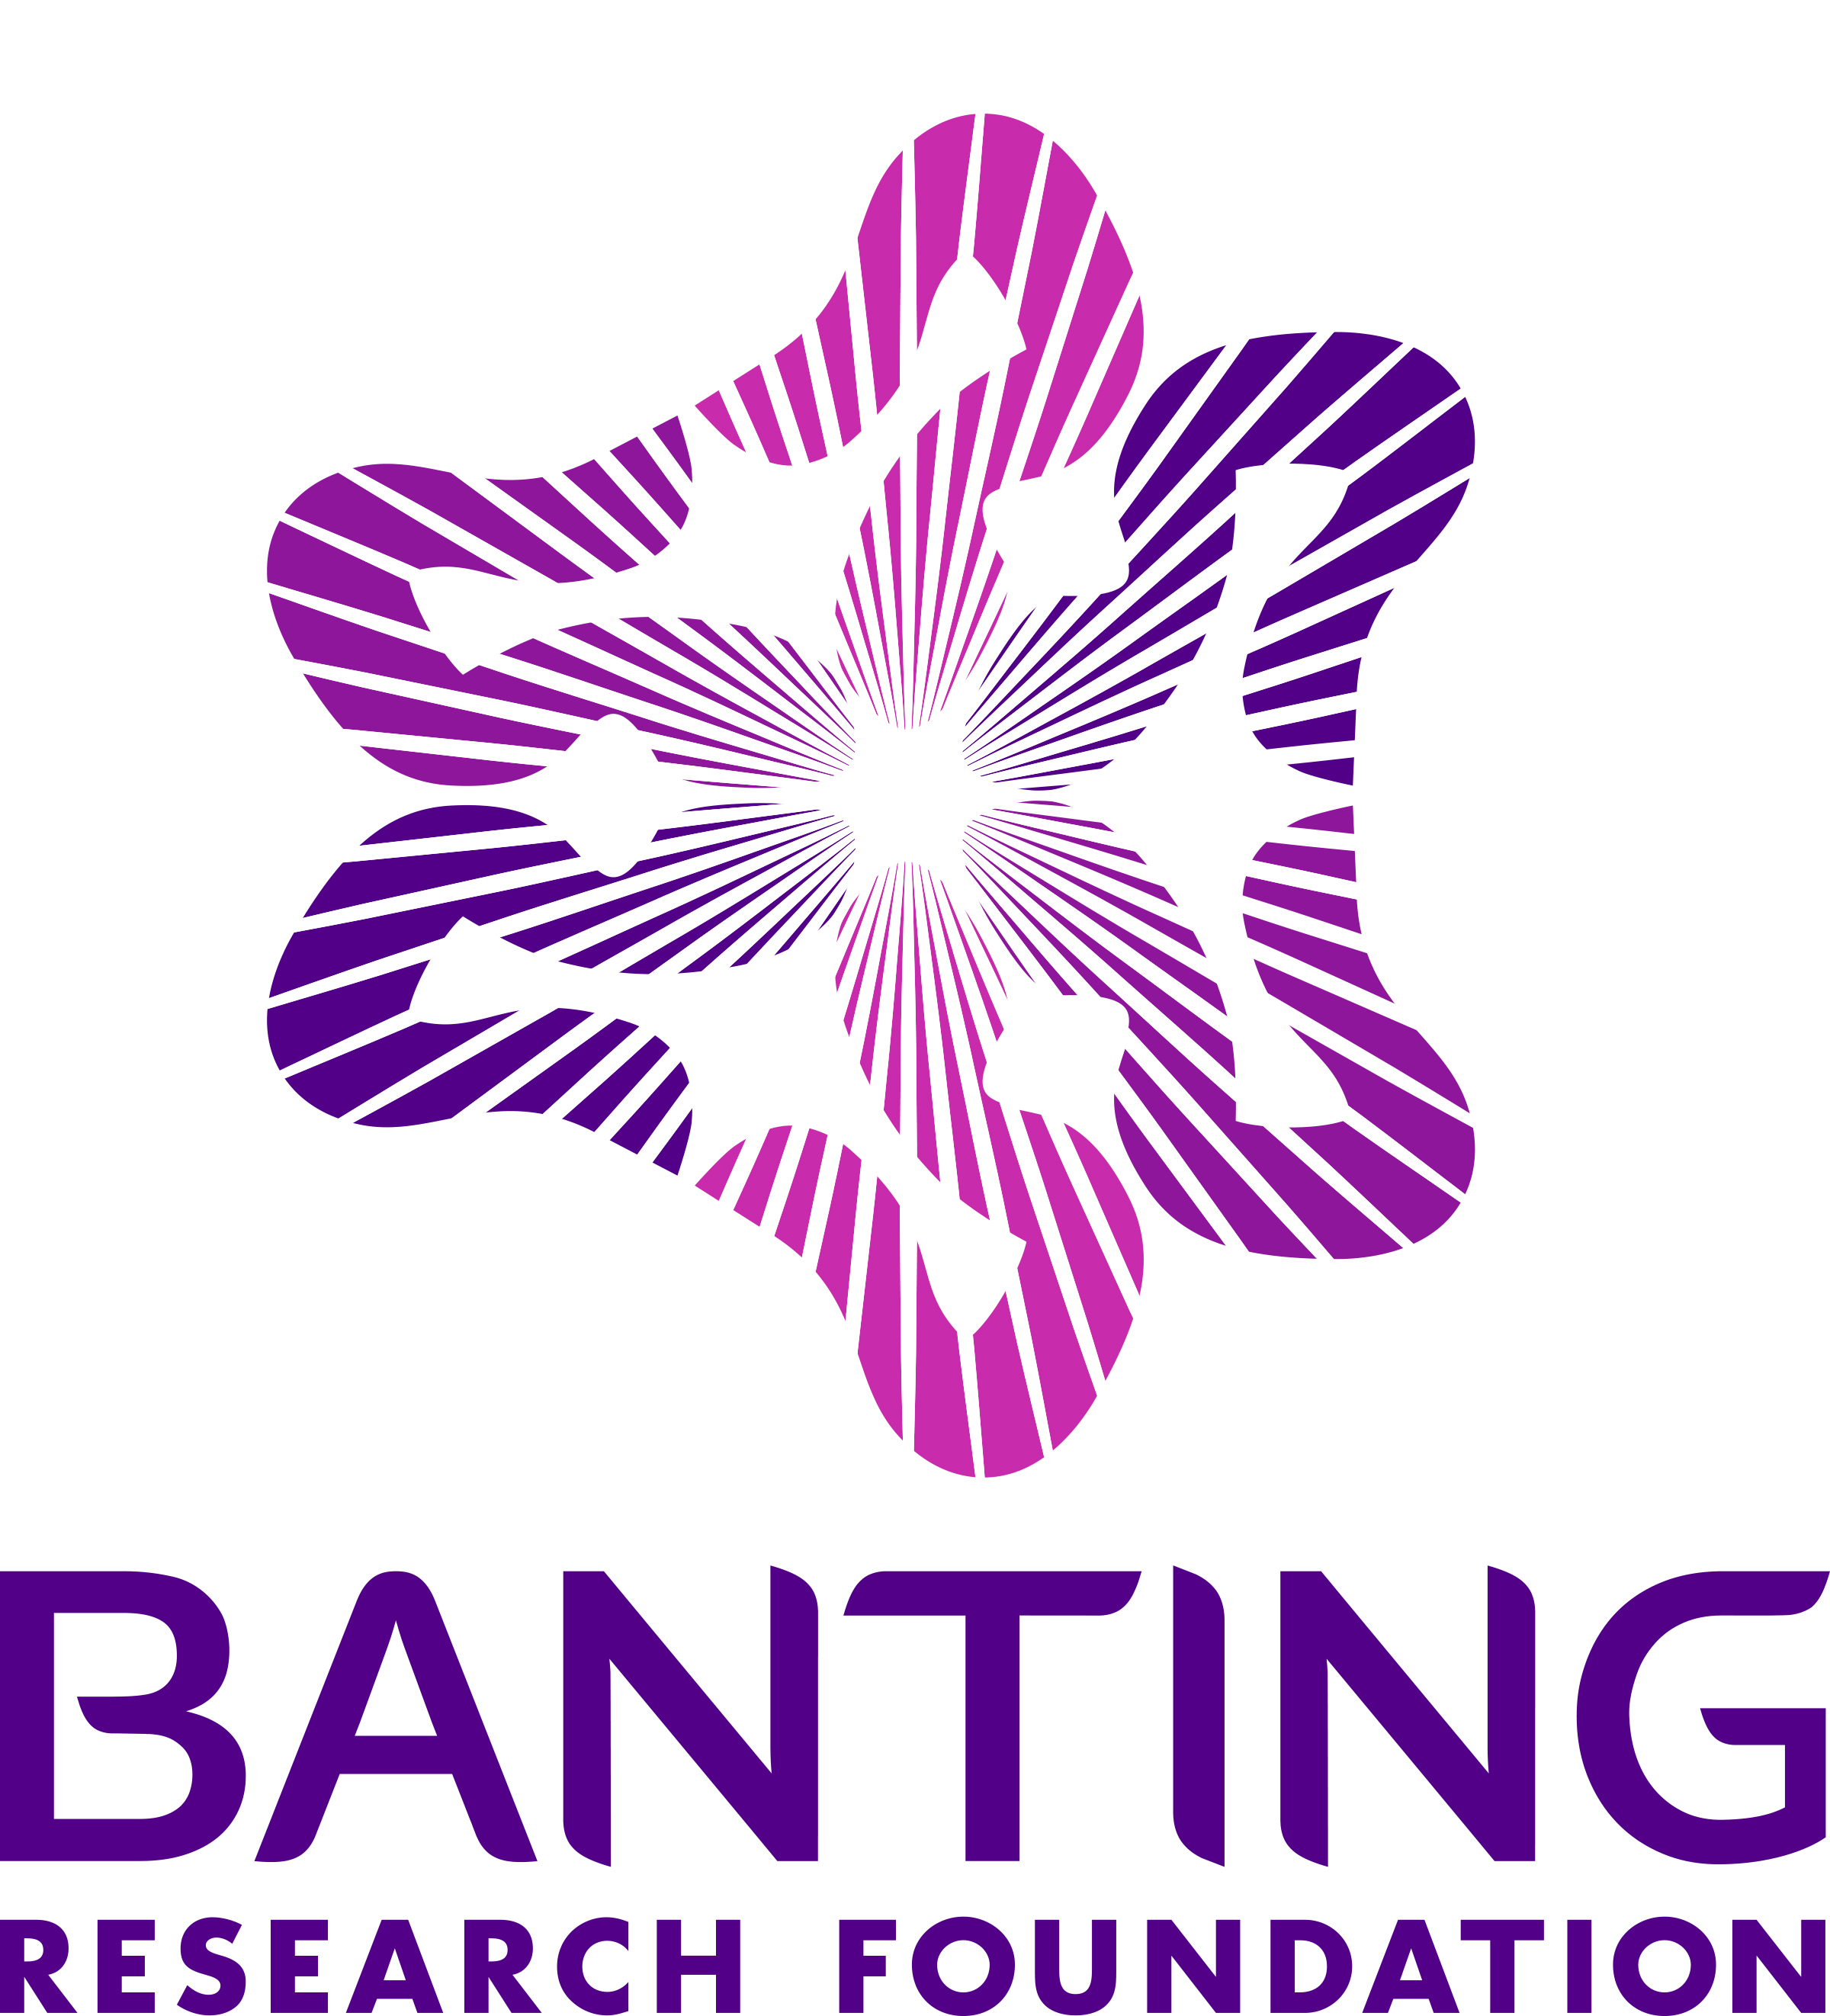 The Banting Research Foundation (BRF)